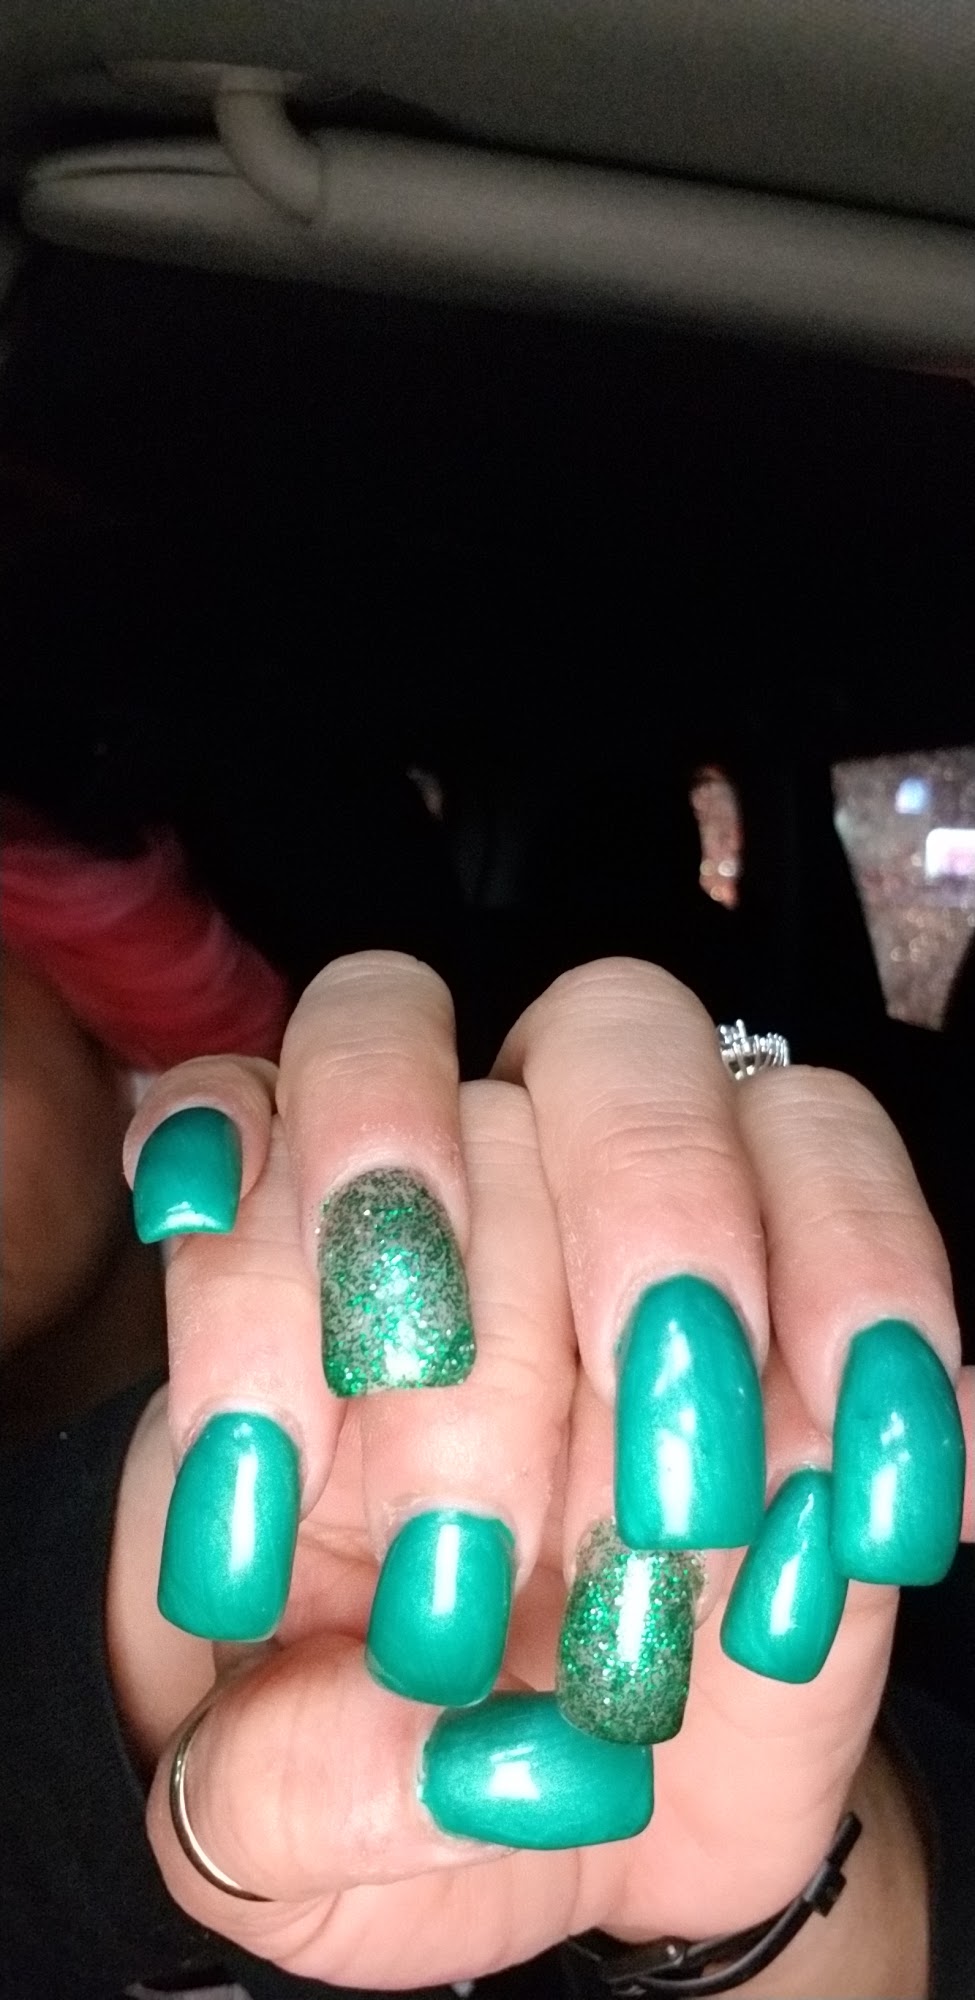 Tammie's Nails